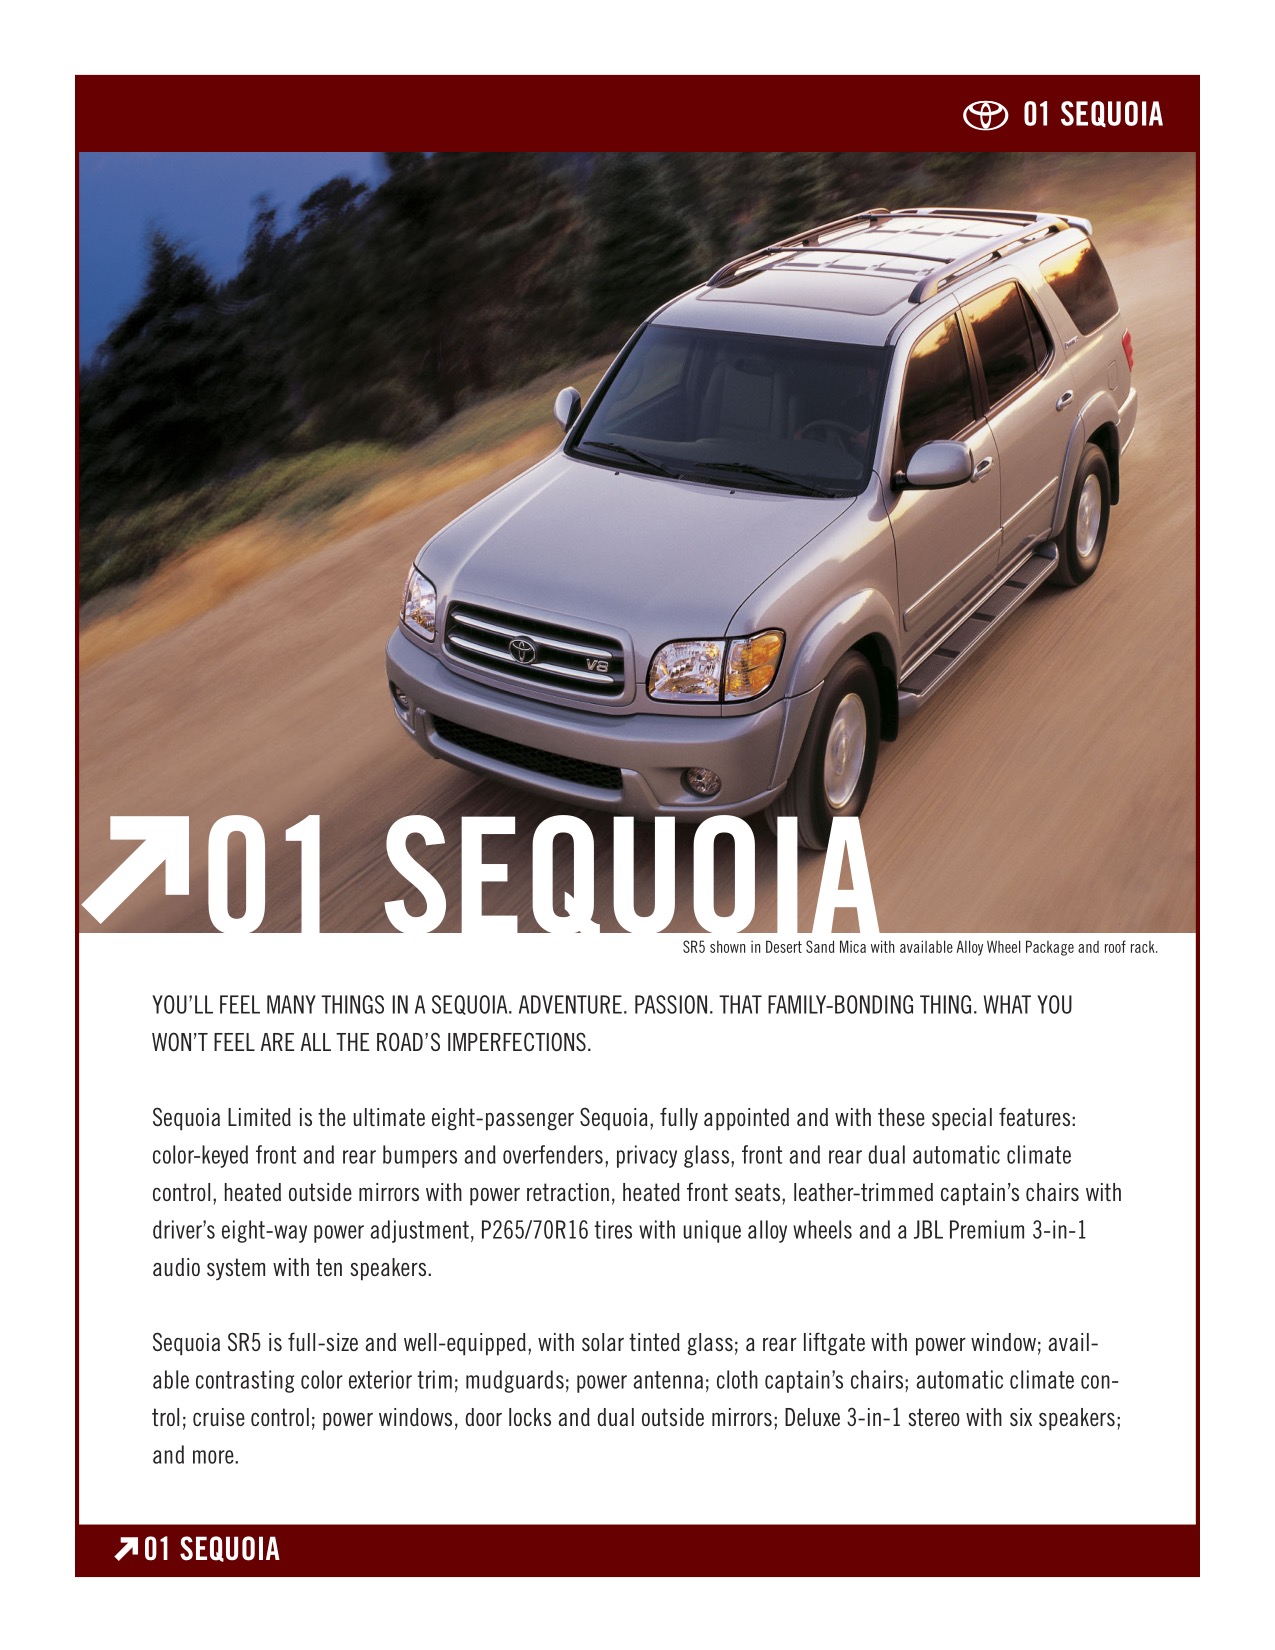 2001 Toyota Sequoia Brochure Page 1